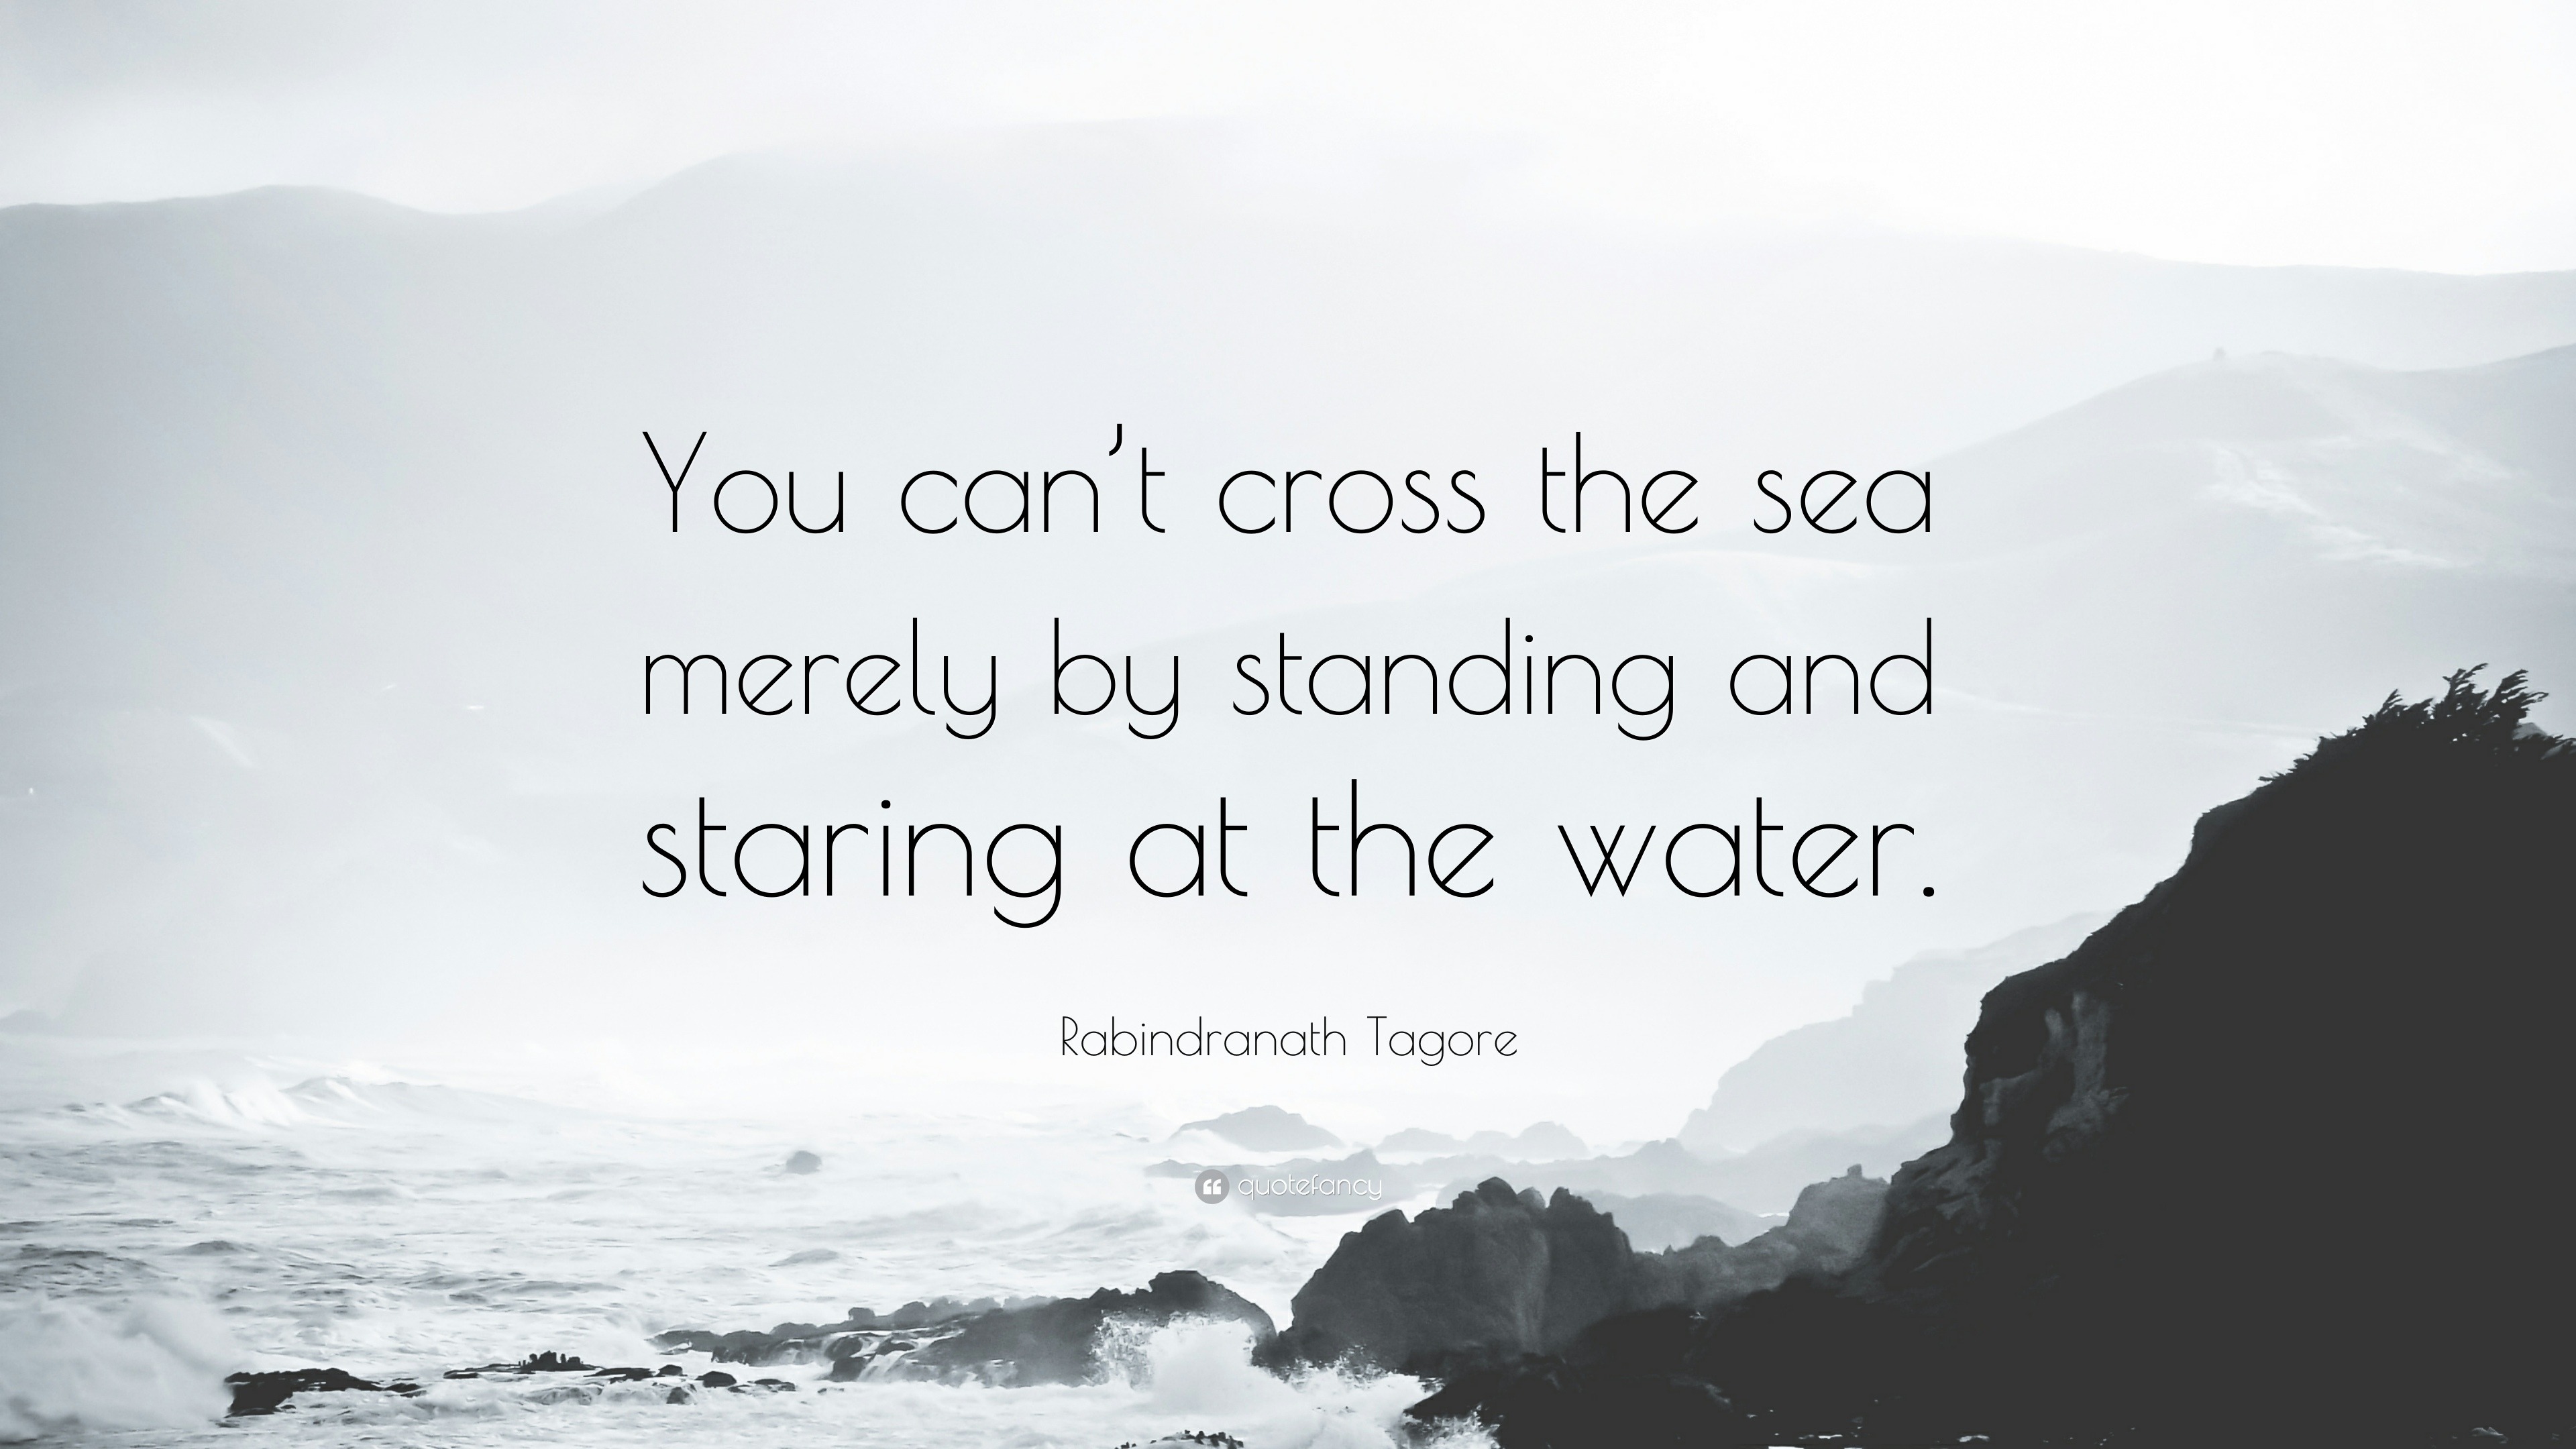 14 "You can t cross the sea merely by standing and staring at the water" Rabindranath Tagore